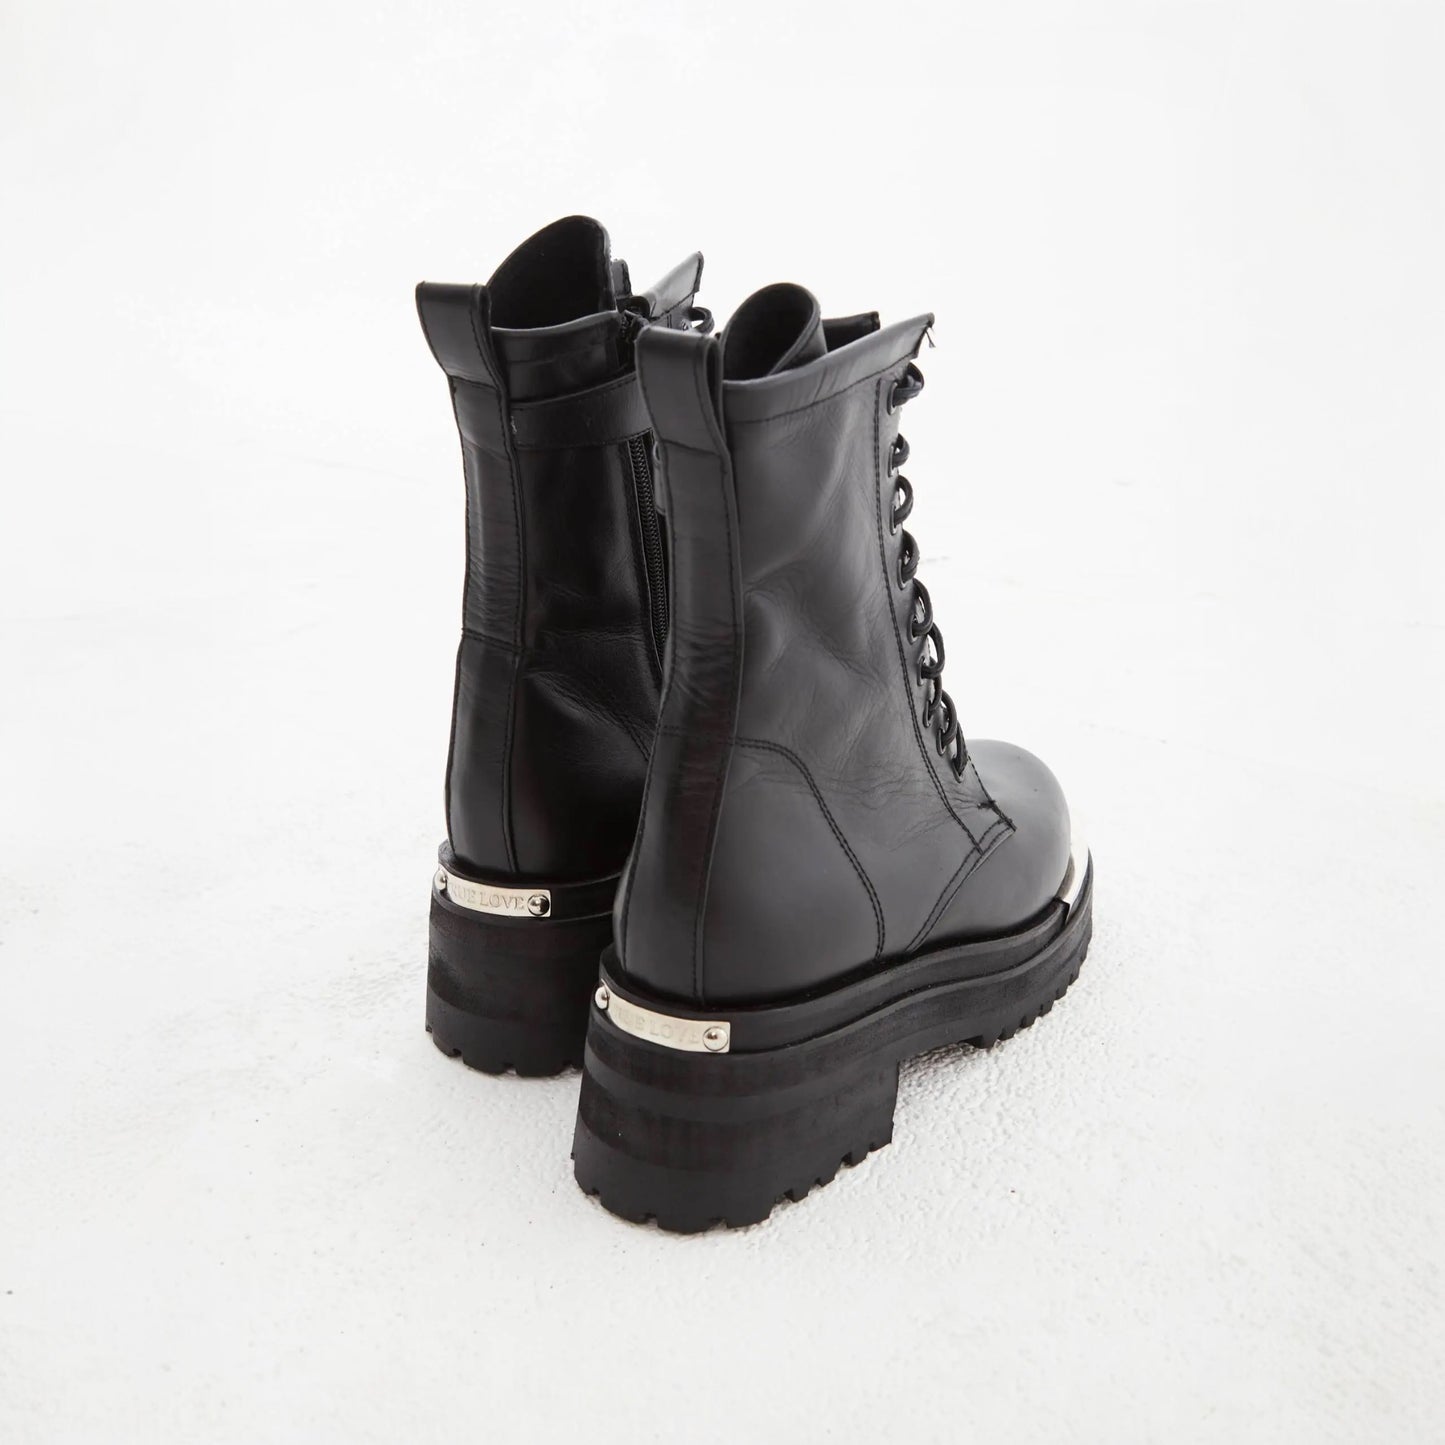 Boots massive black 9 with metal in the front